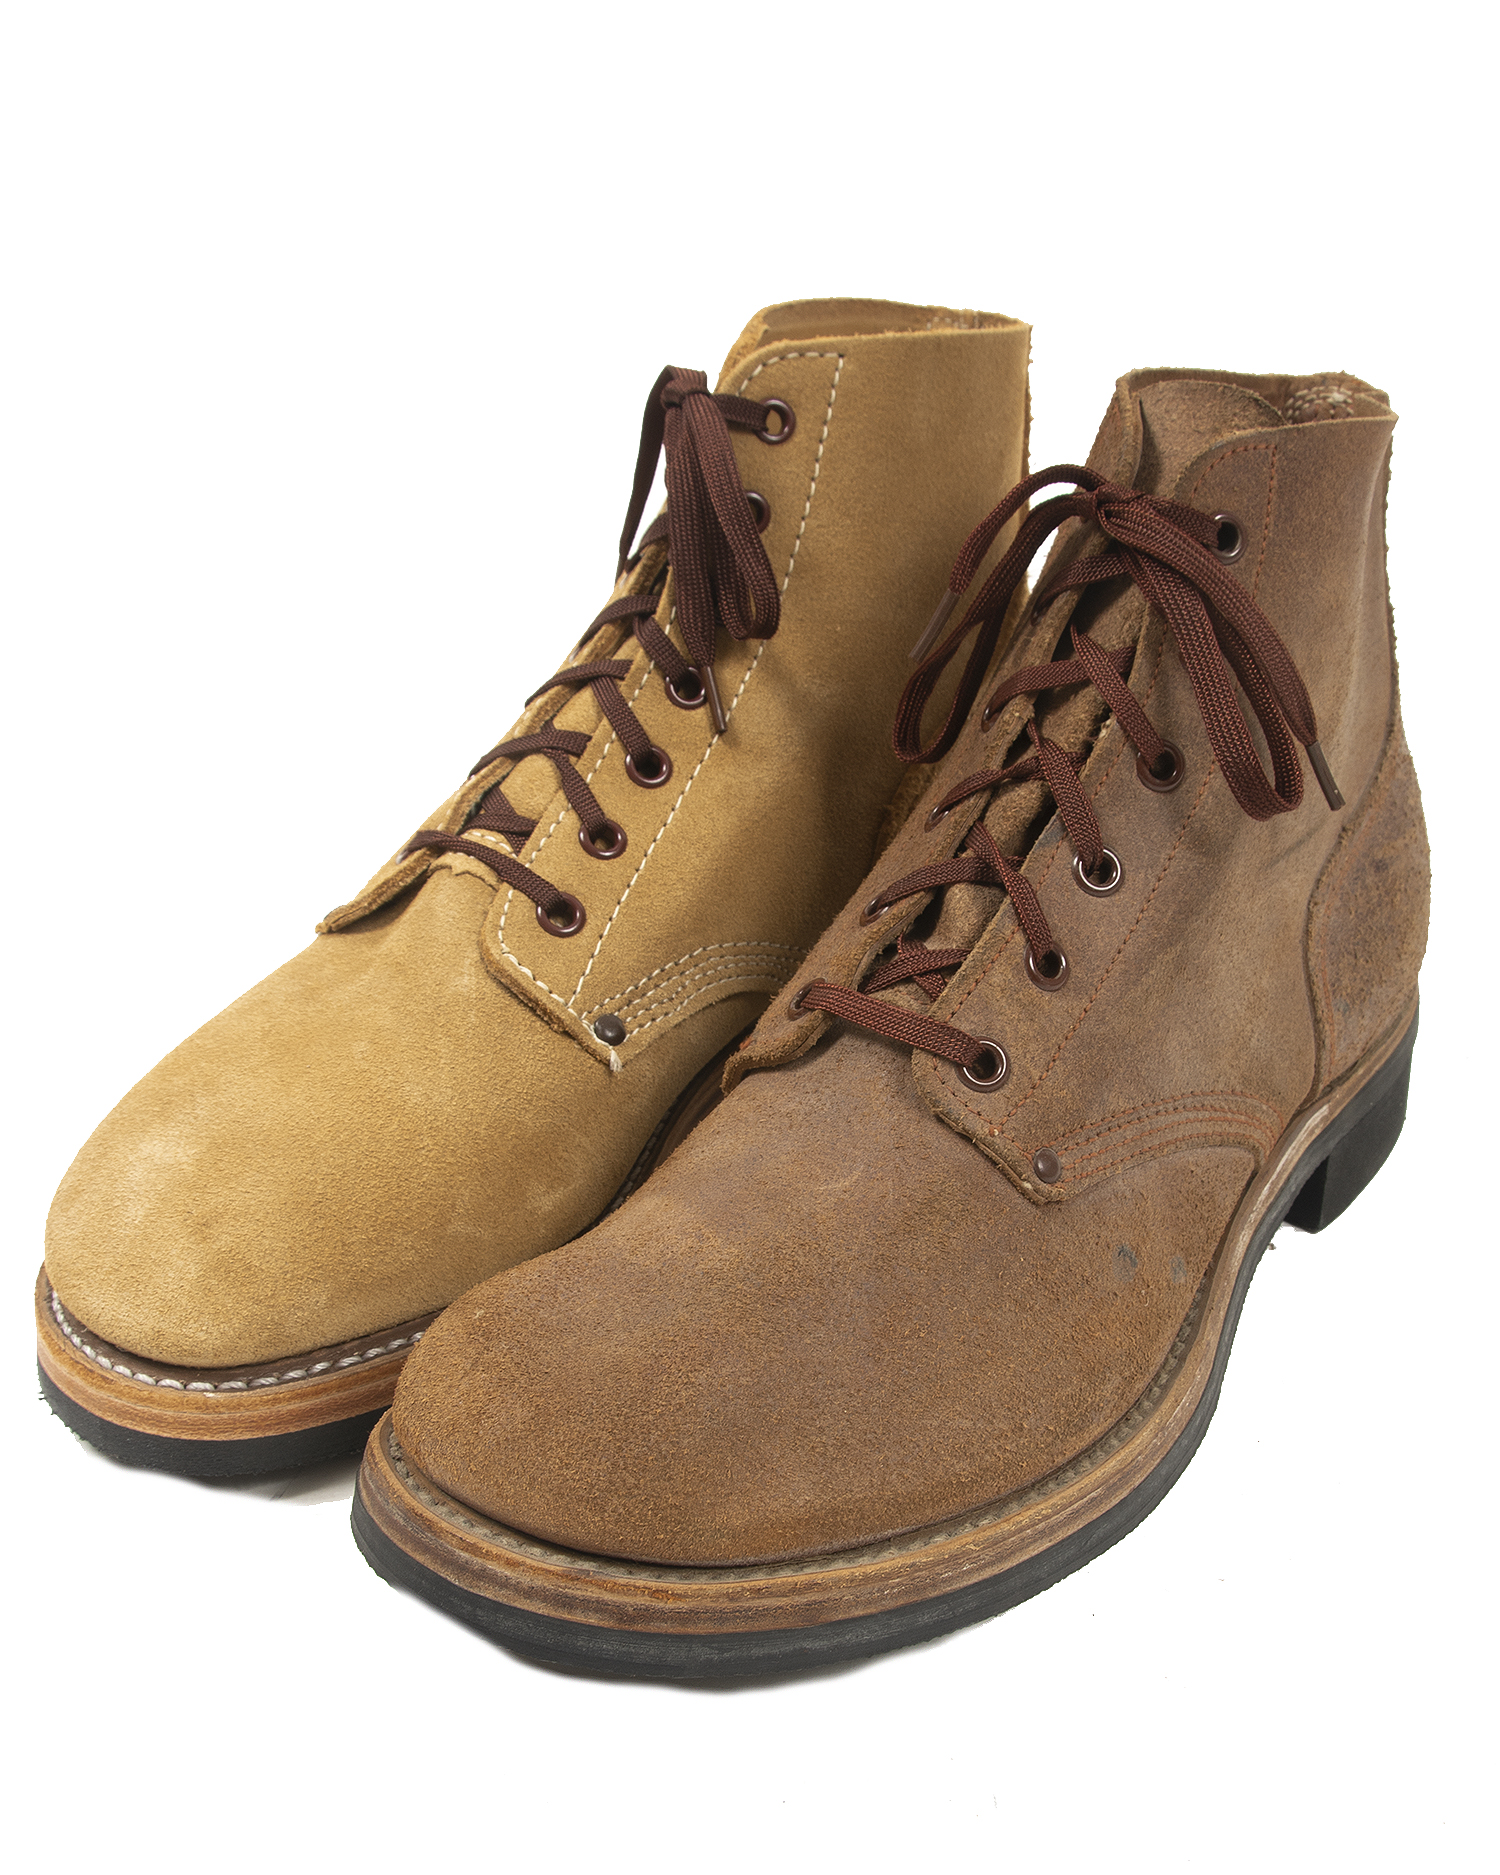 WWII Type III Roughout Boots - Made in USA